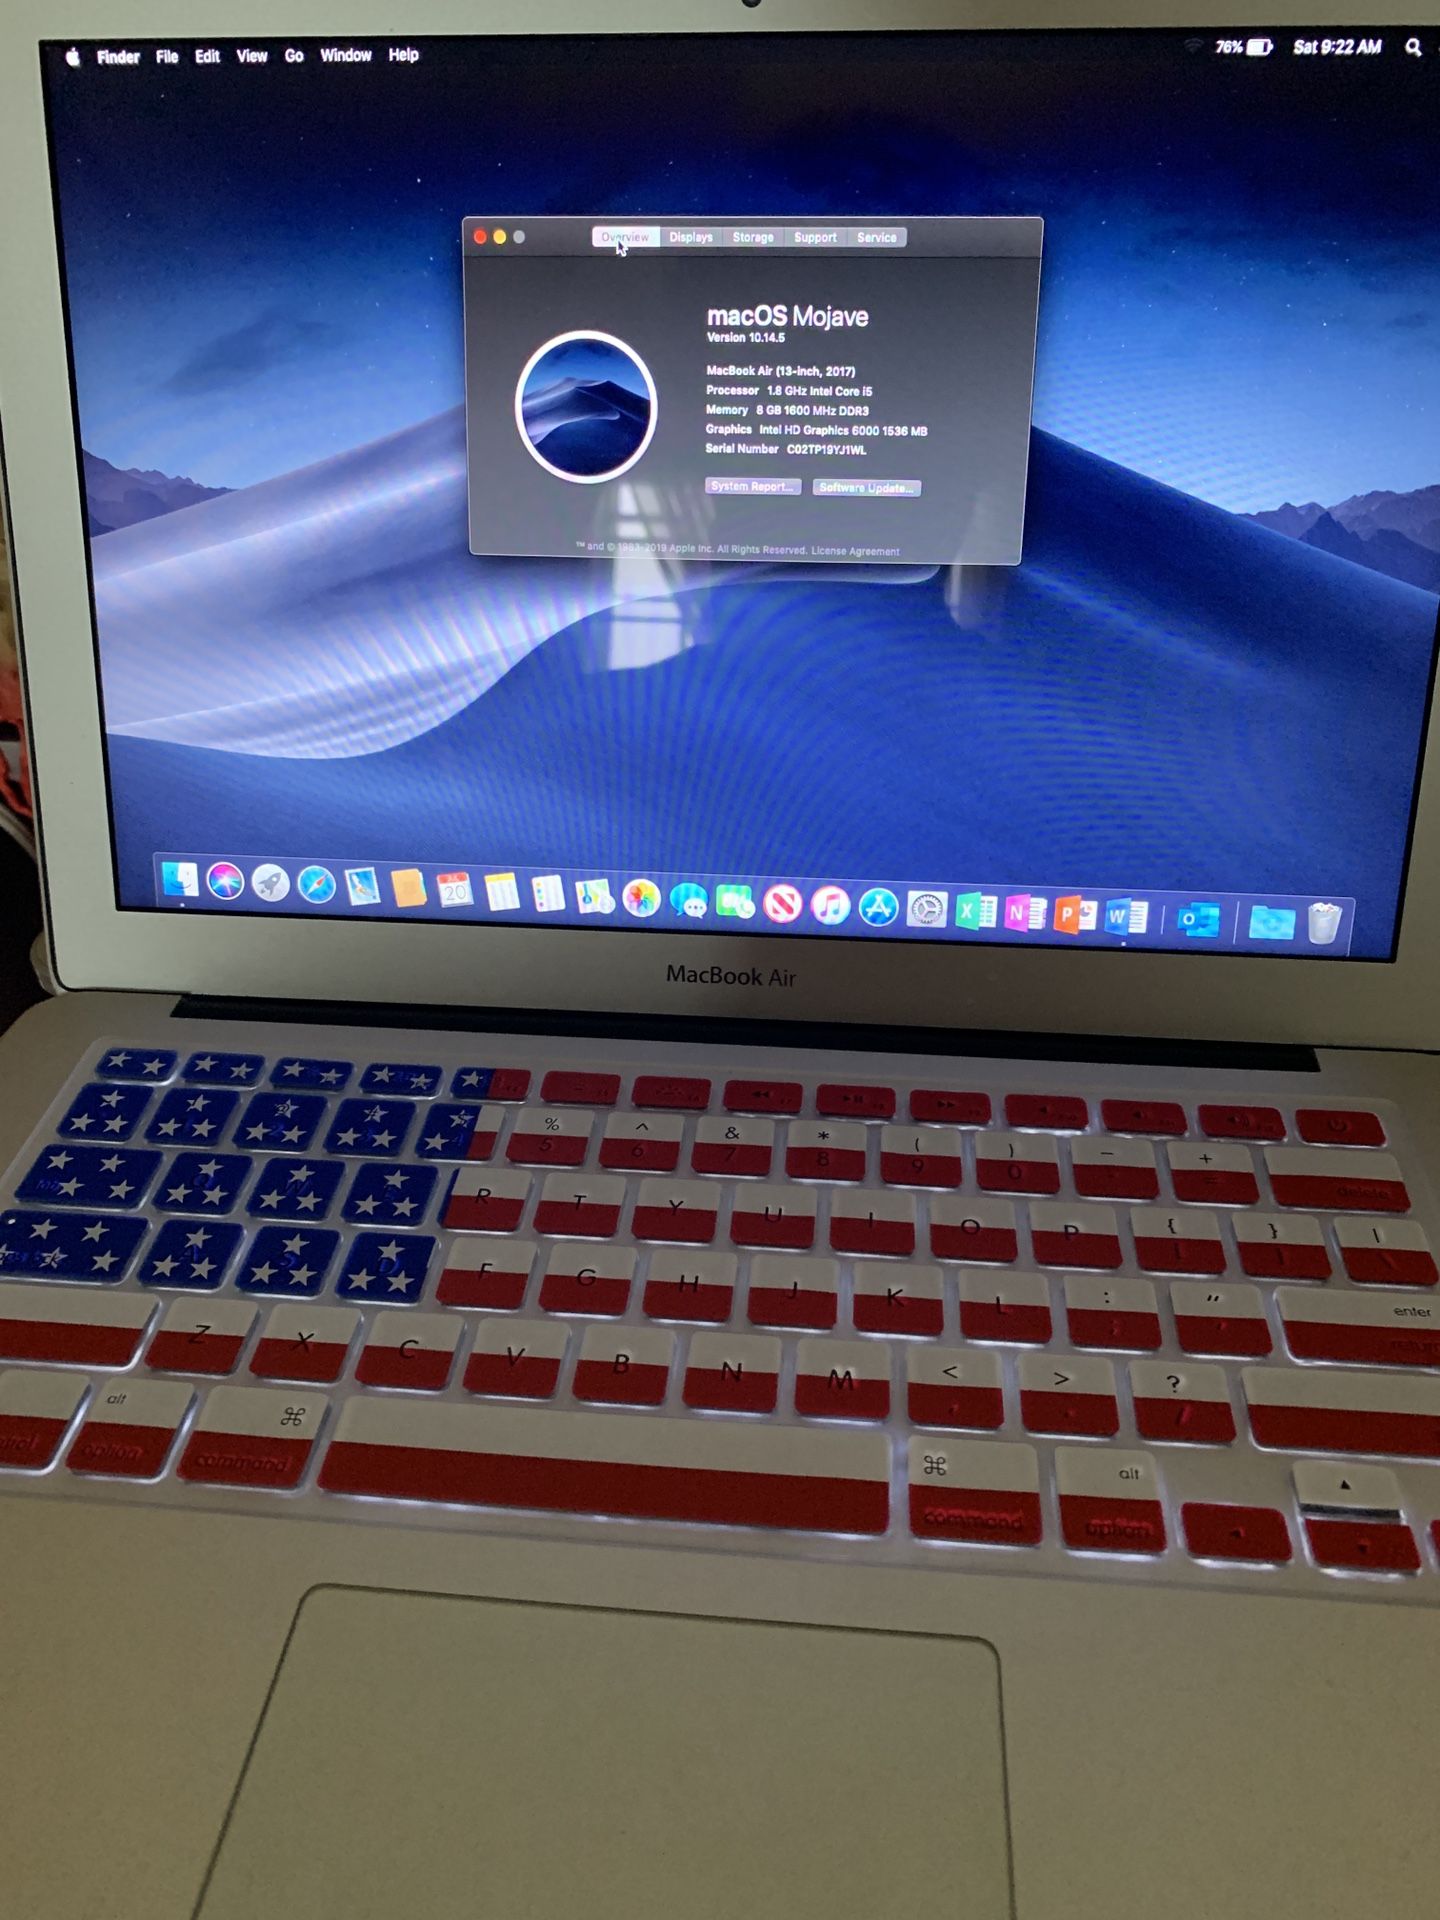 MacBook Air 13” 2017 i5/8/256gb with Microsoft office 2016